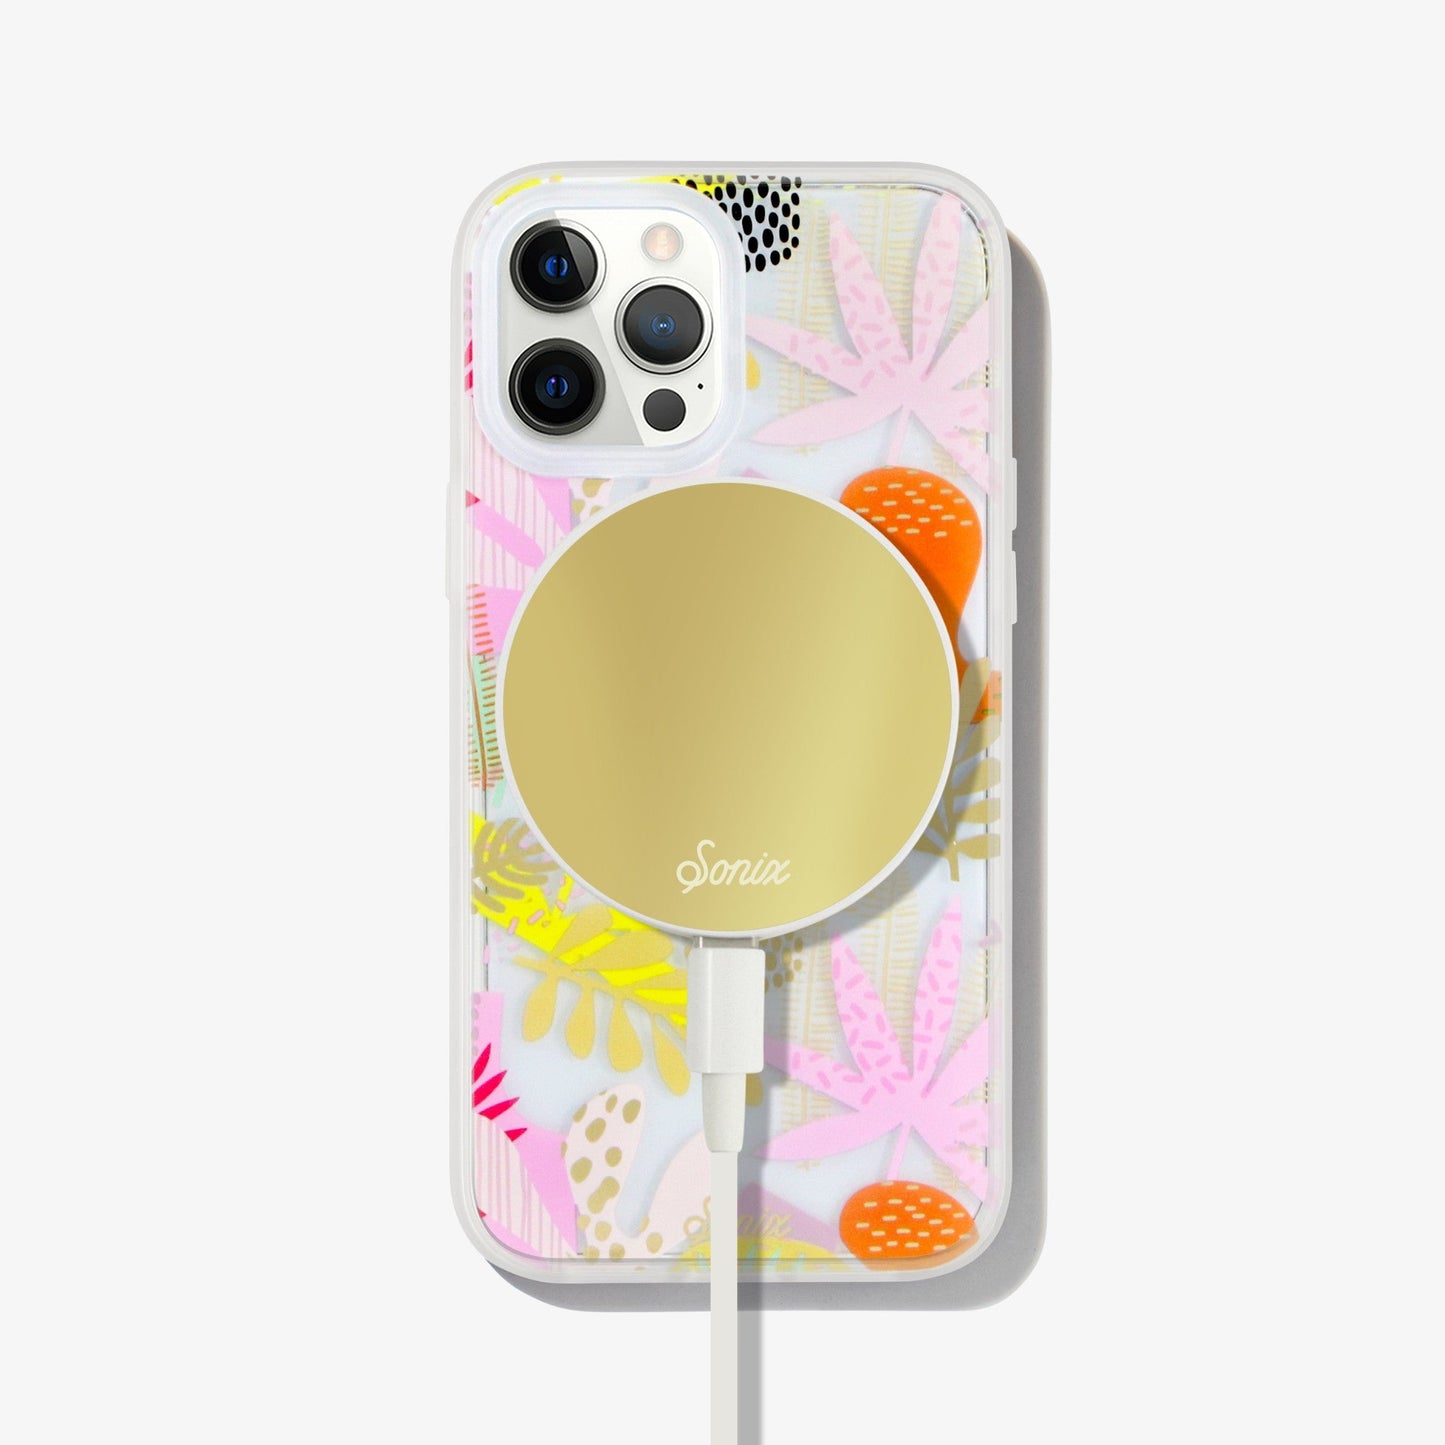 a collection of earthy shapes and forms, like plants and flowers to create a composition of playful abstract art with gold foil details shown on an iphone 12 pro with a gold maglink charger on the back